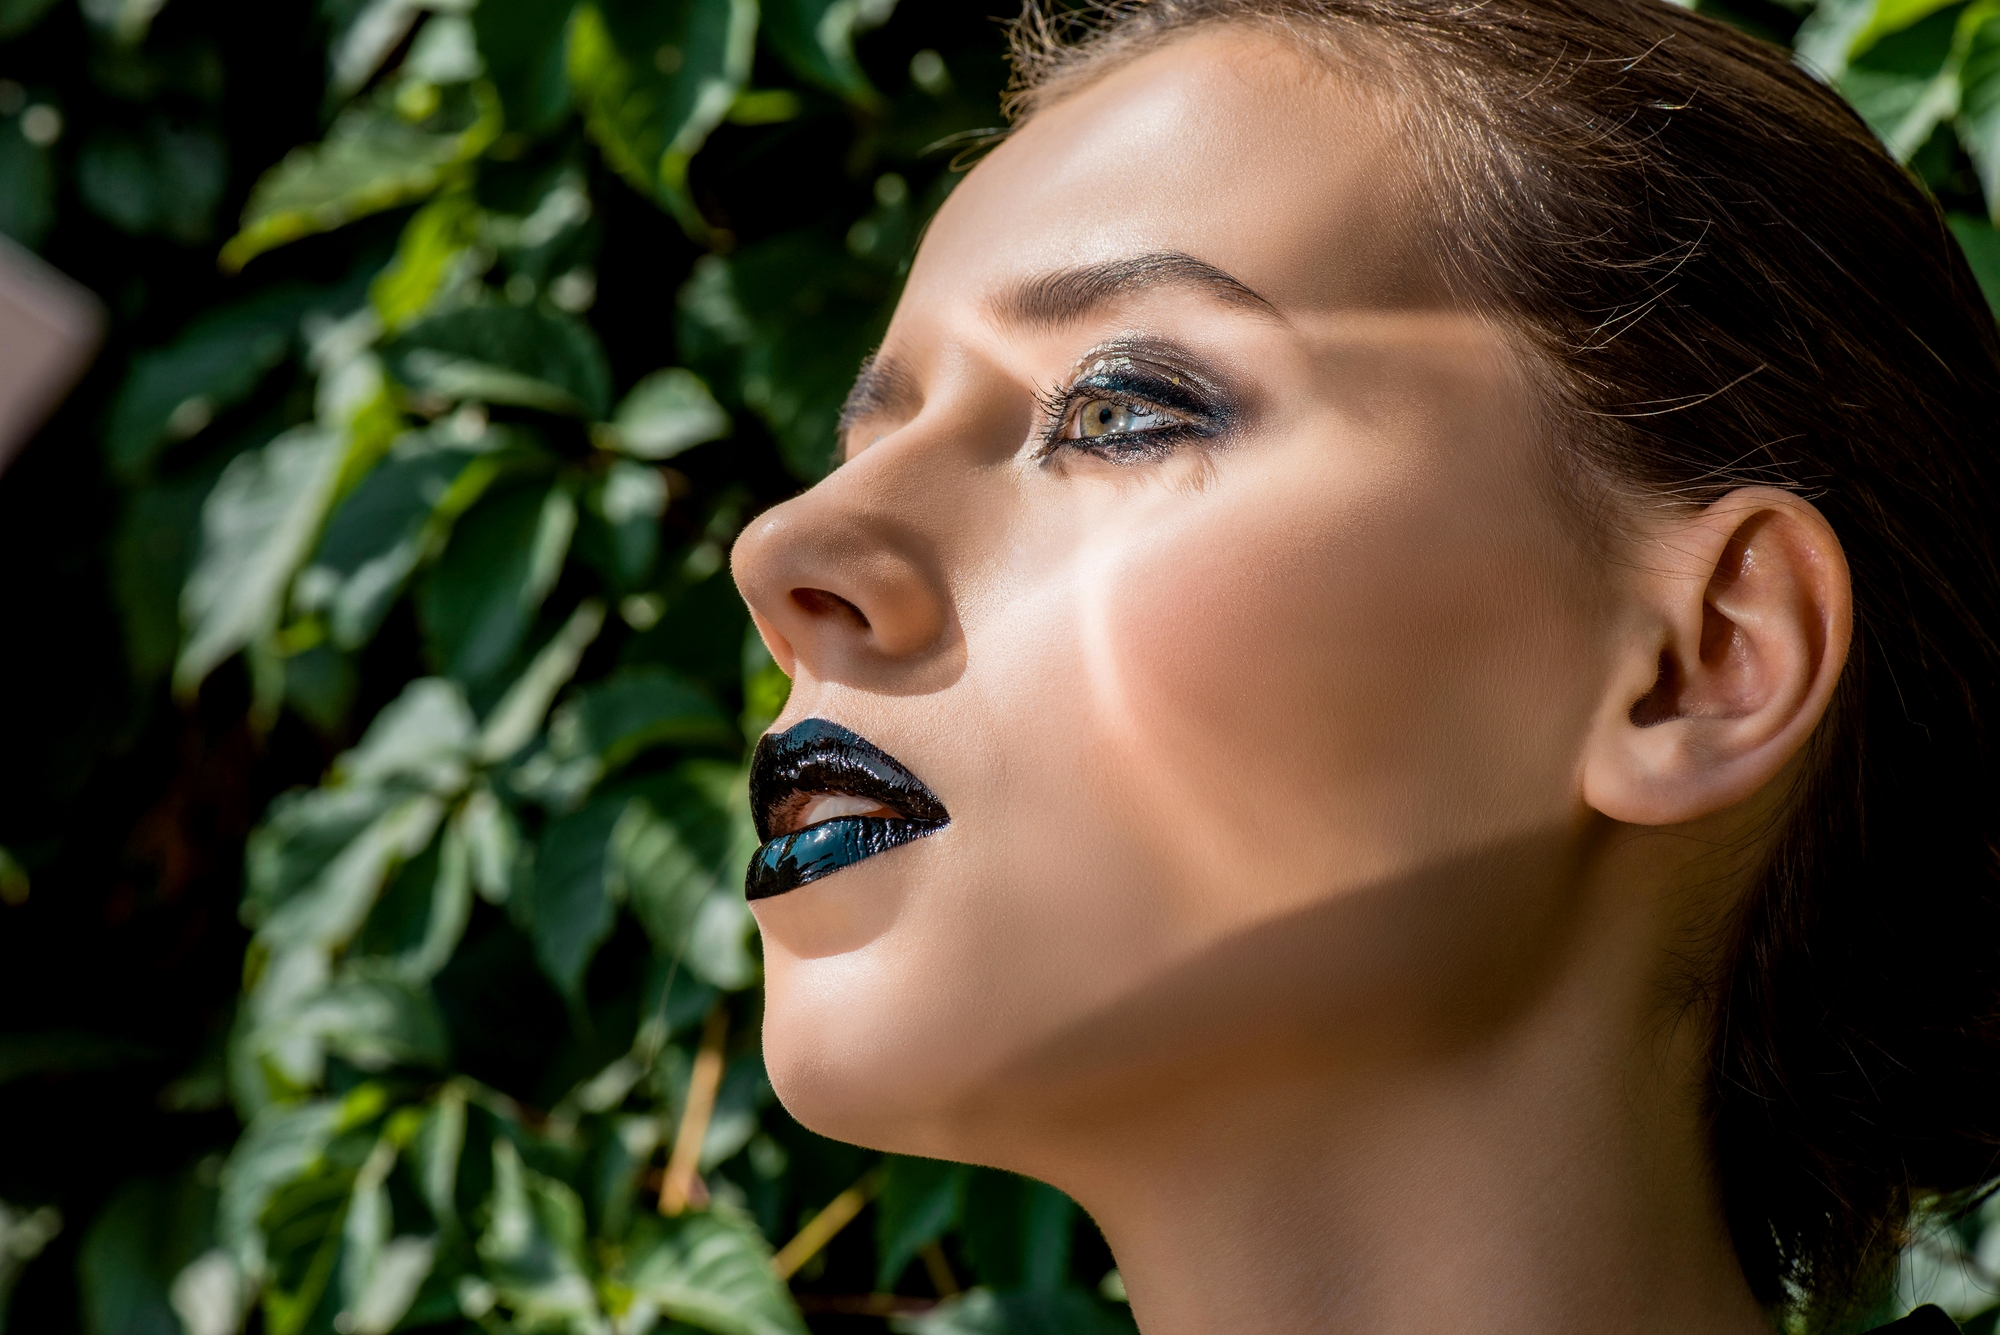 A close-up side profile of a woman with dramatic black and metallic makeup, including dark lipstick and bold eyeshadow. She has light skin and her hair pulled back, standing against a backdrop of green leaves illuminated by sunlight.